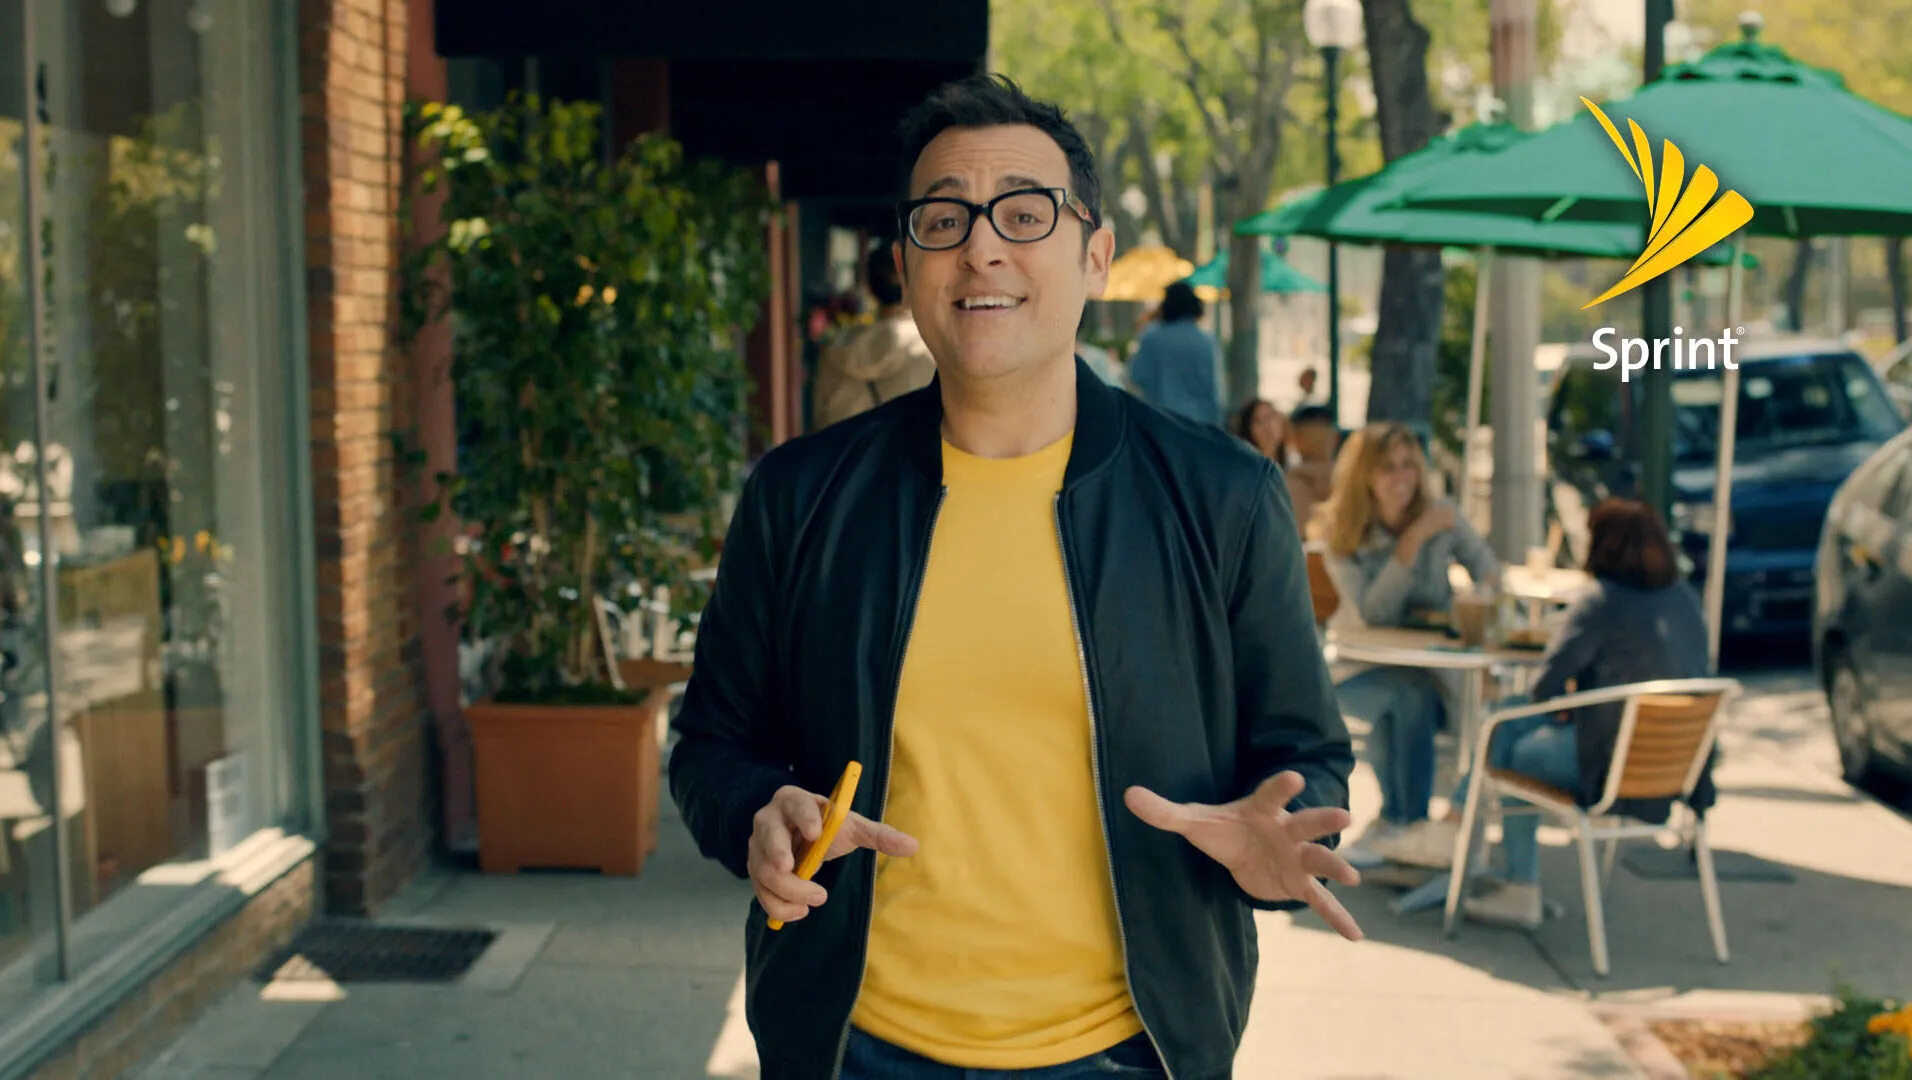 verizons-can-you-hear-me-now-guy-has-switched-to-sprint